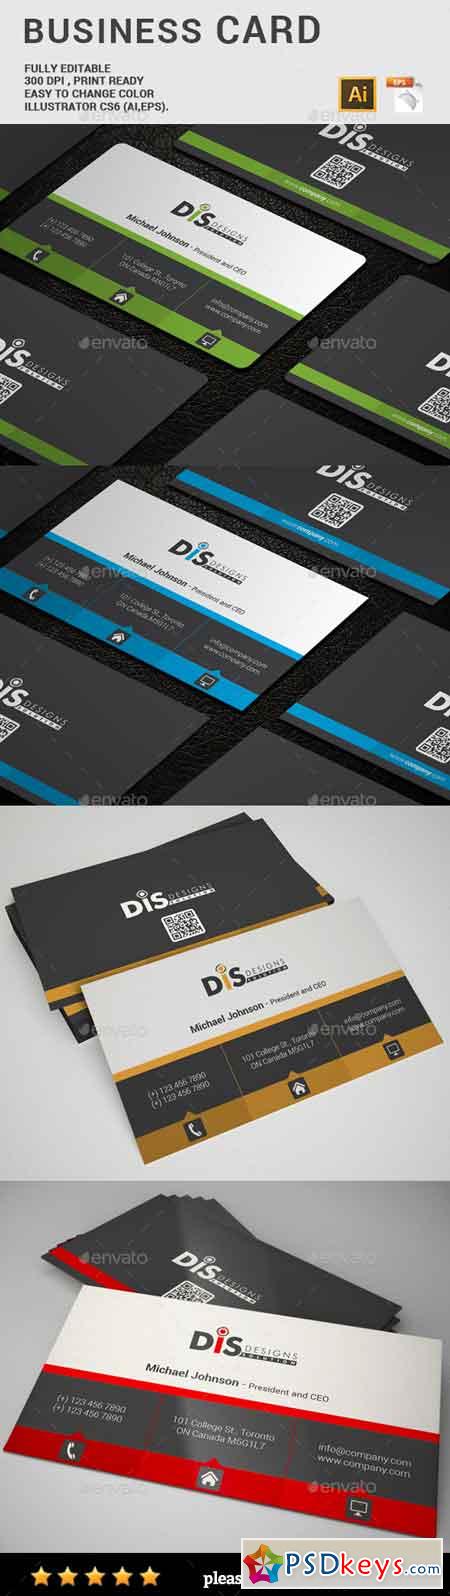 Business Card 14275168